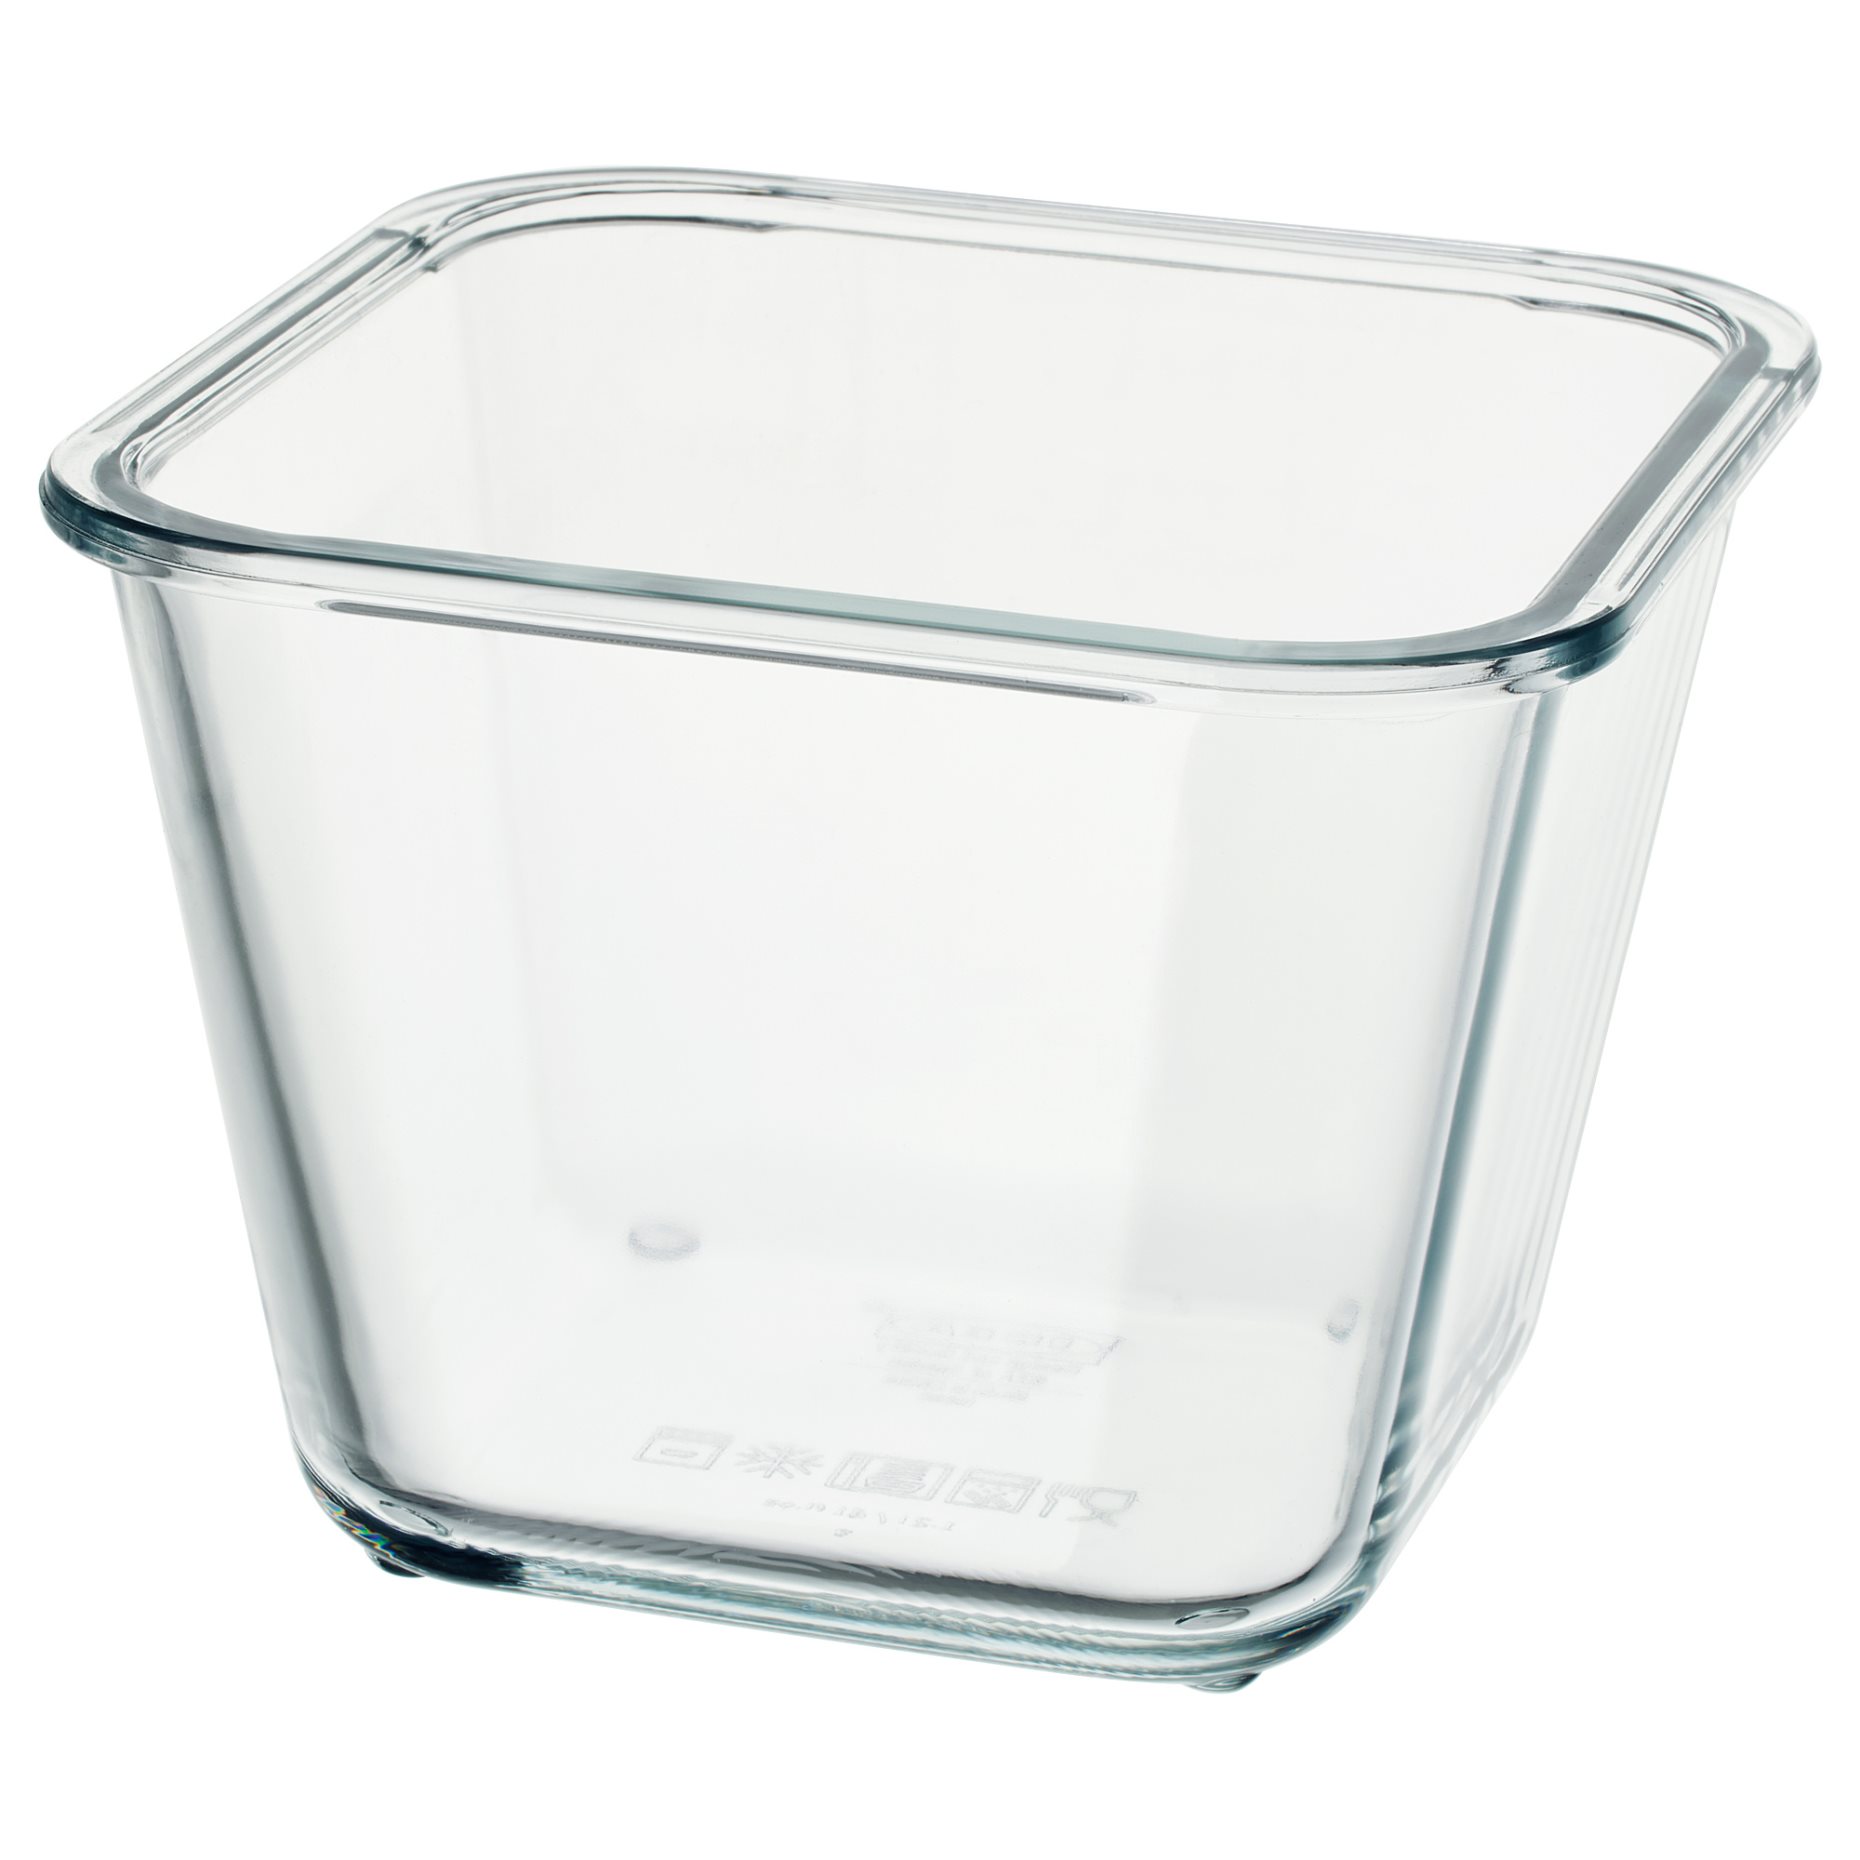 IKEA 365+, food container square/glass, 1.2 l, 403.592.09